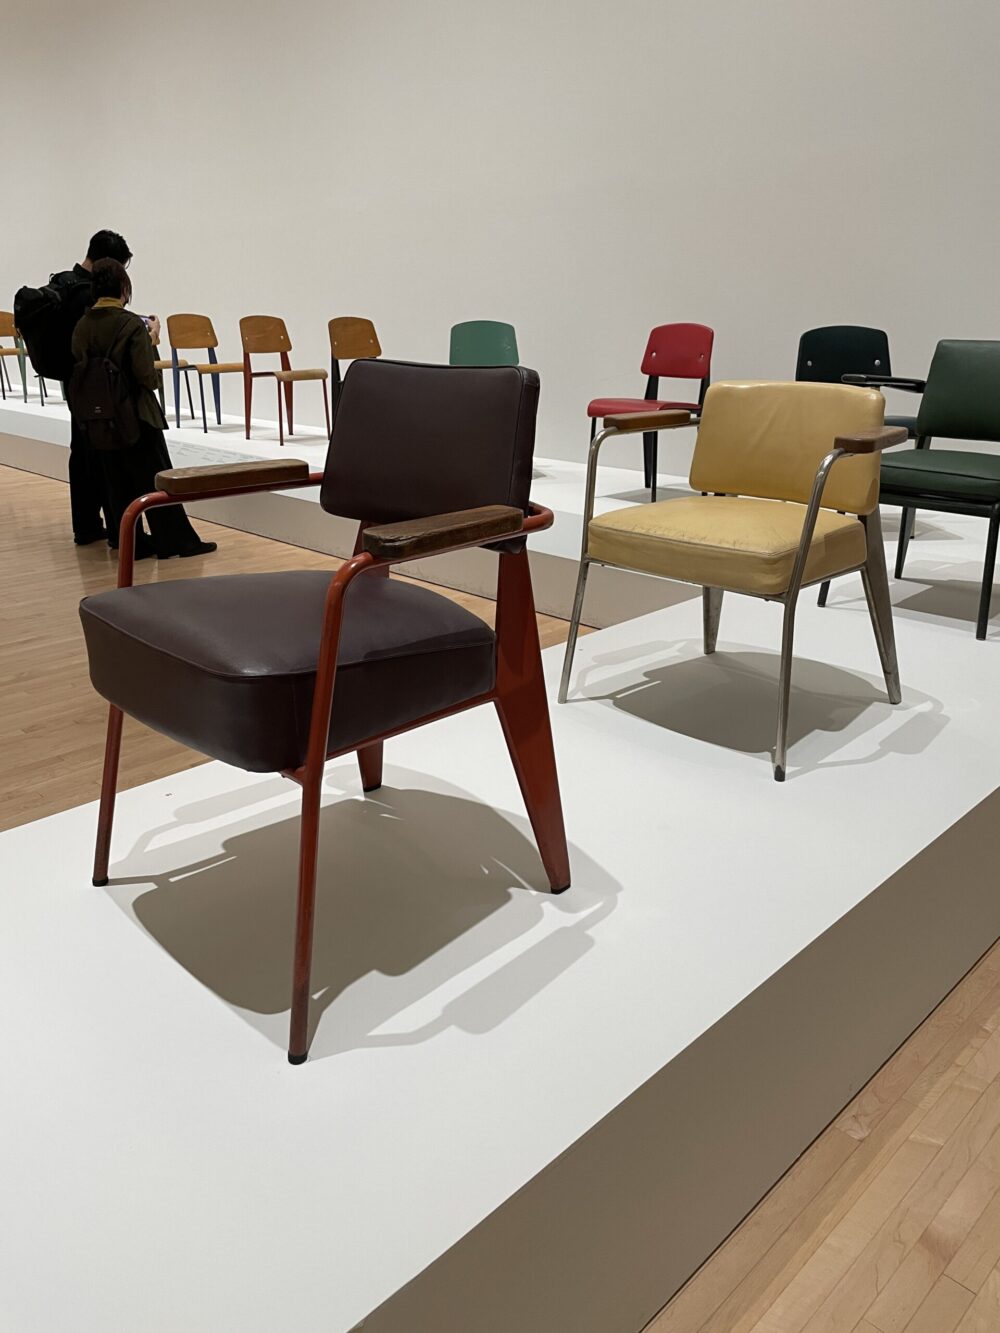 Jean prouve chairs